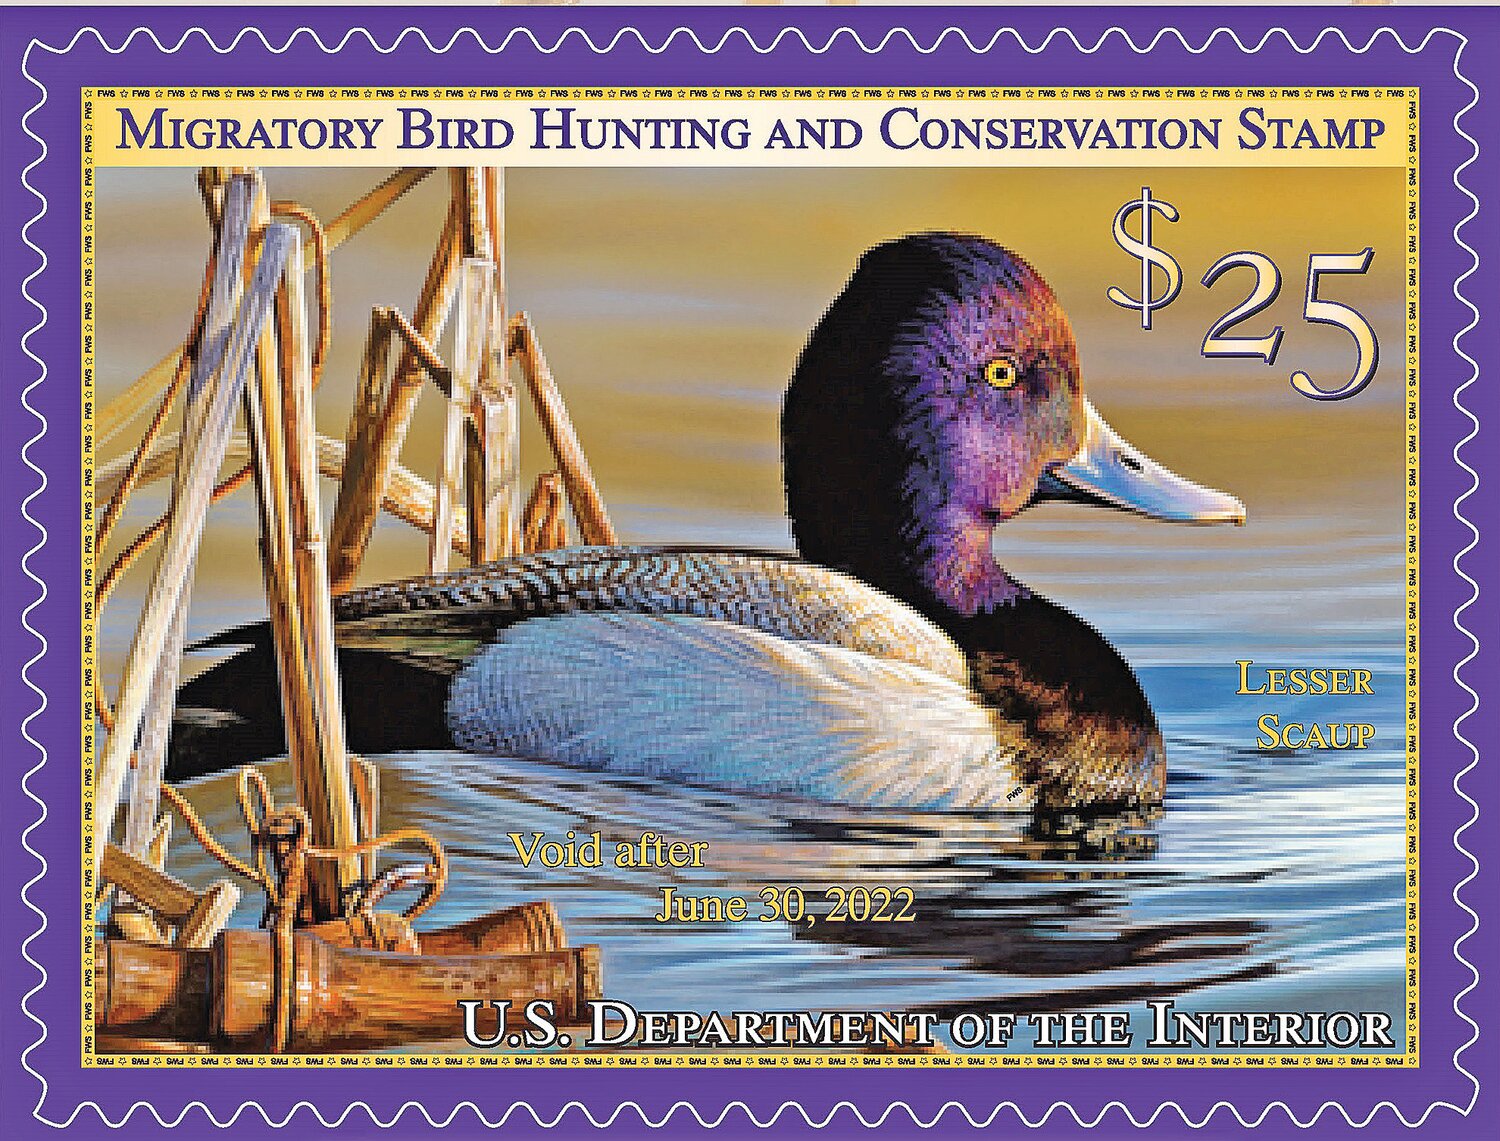 The Migratory Bird Stamp, also known as a duck stamp, is required for those who wish to hunt migratory waterfowl. The artwork is selected in a prestigious annual competition, run by the U.S. Fish and Wildlife Service. Funds raised from purchase of the stamps by hunters total around $40 million annually for conservation.